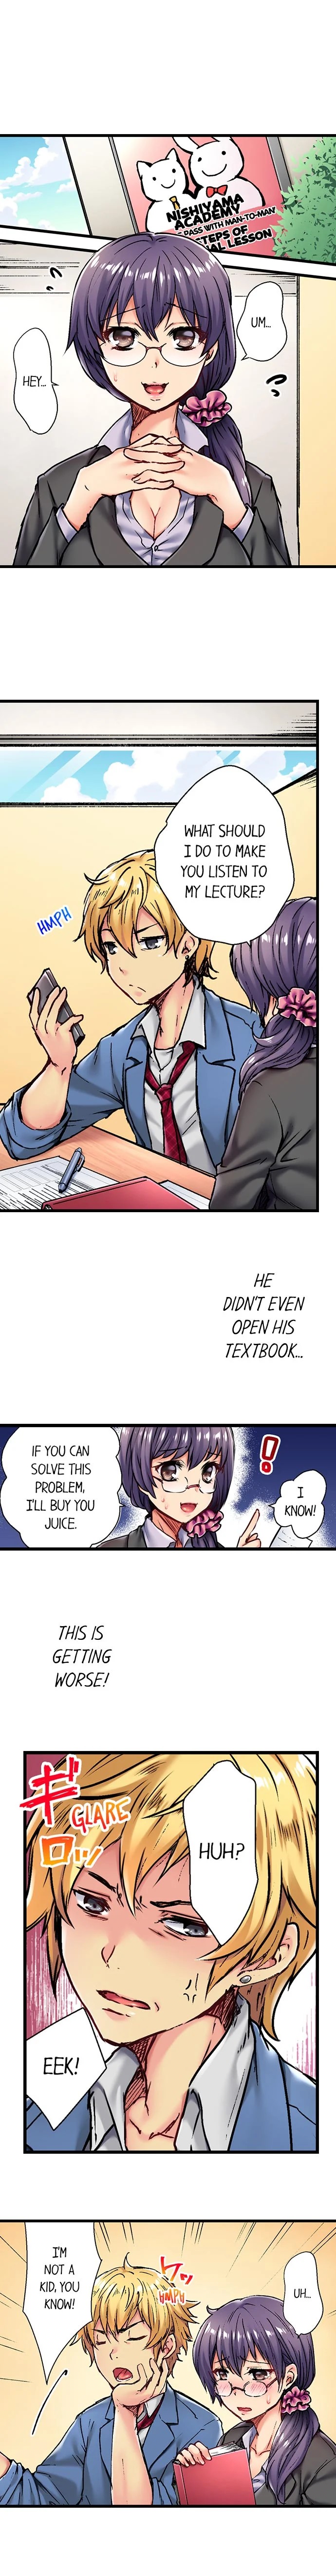 Rewarding My Student With Sex - Chapter 1 Page 6